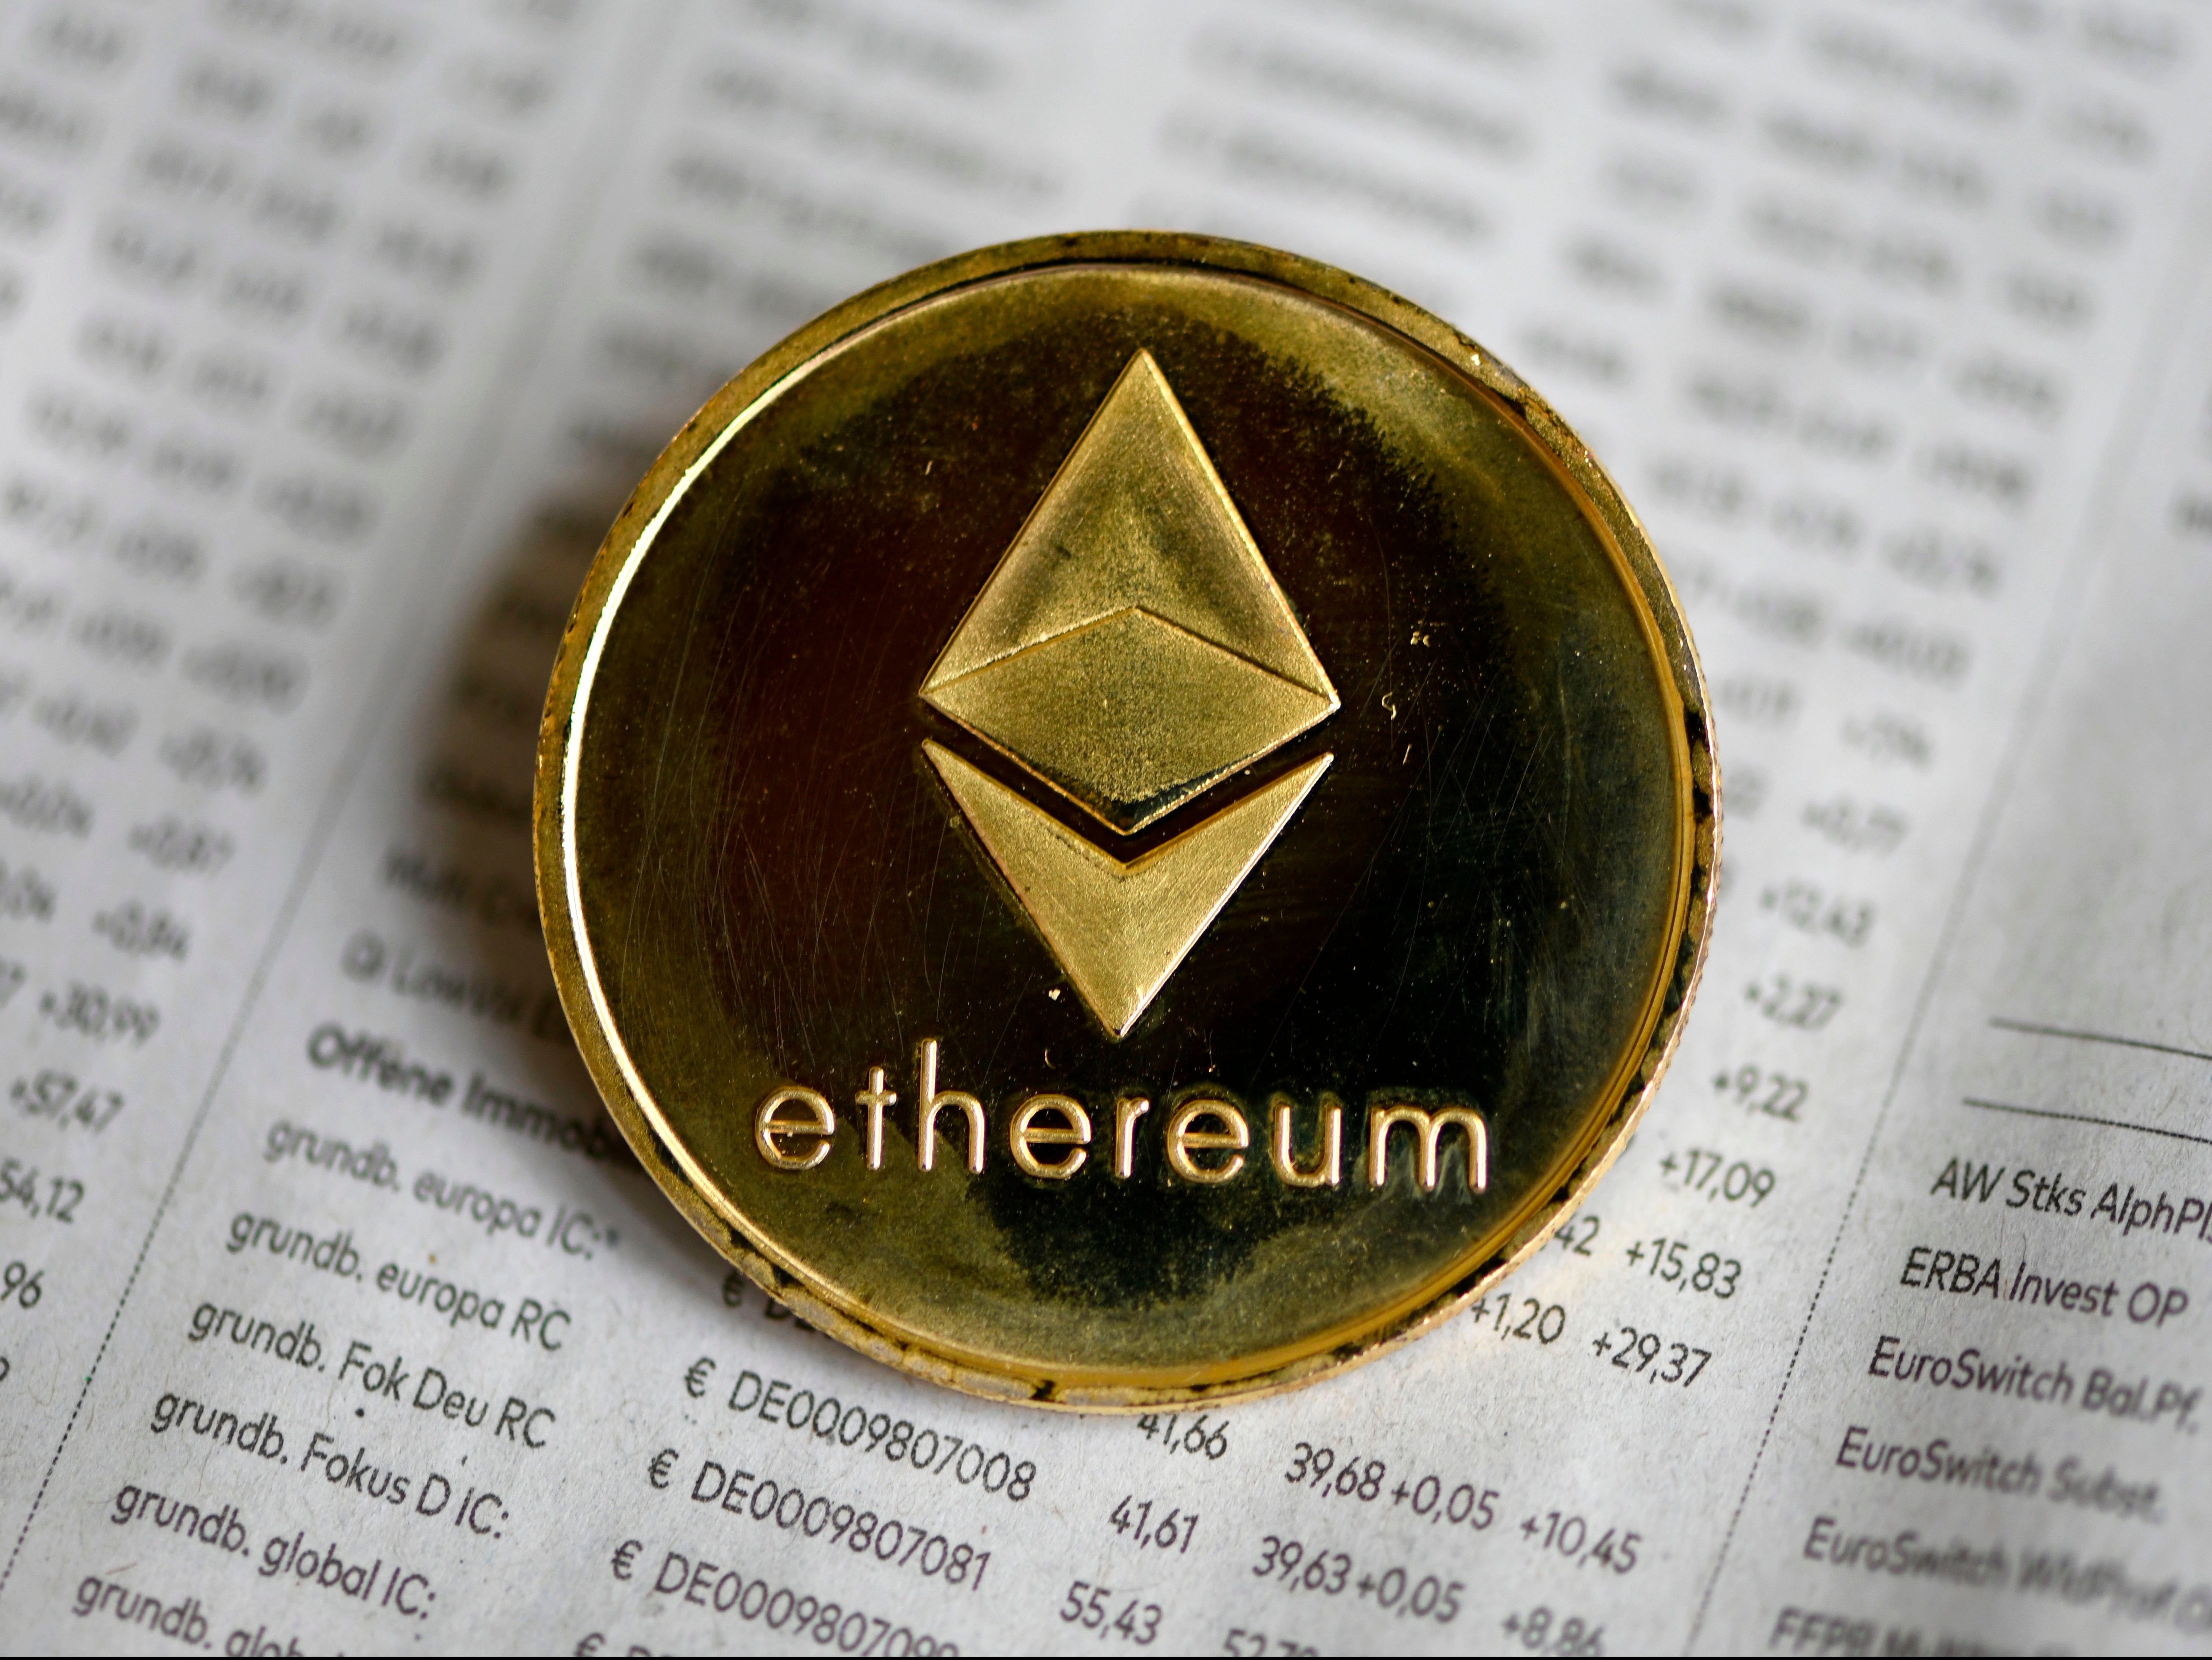 The photo shows a physical imitation of a Ethereum cryptocurrency in Dortmund, western Germany, on 27 January, 2020